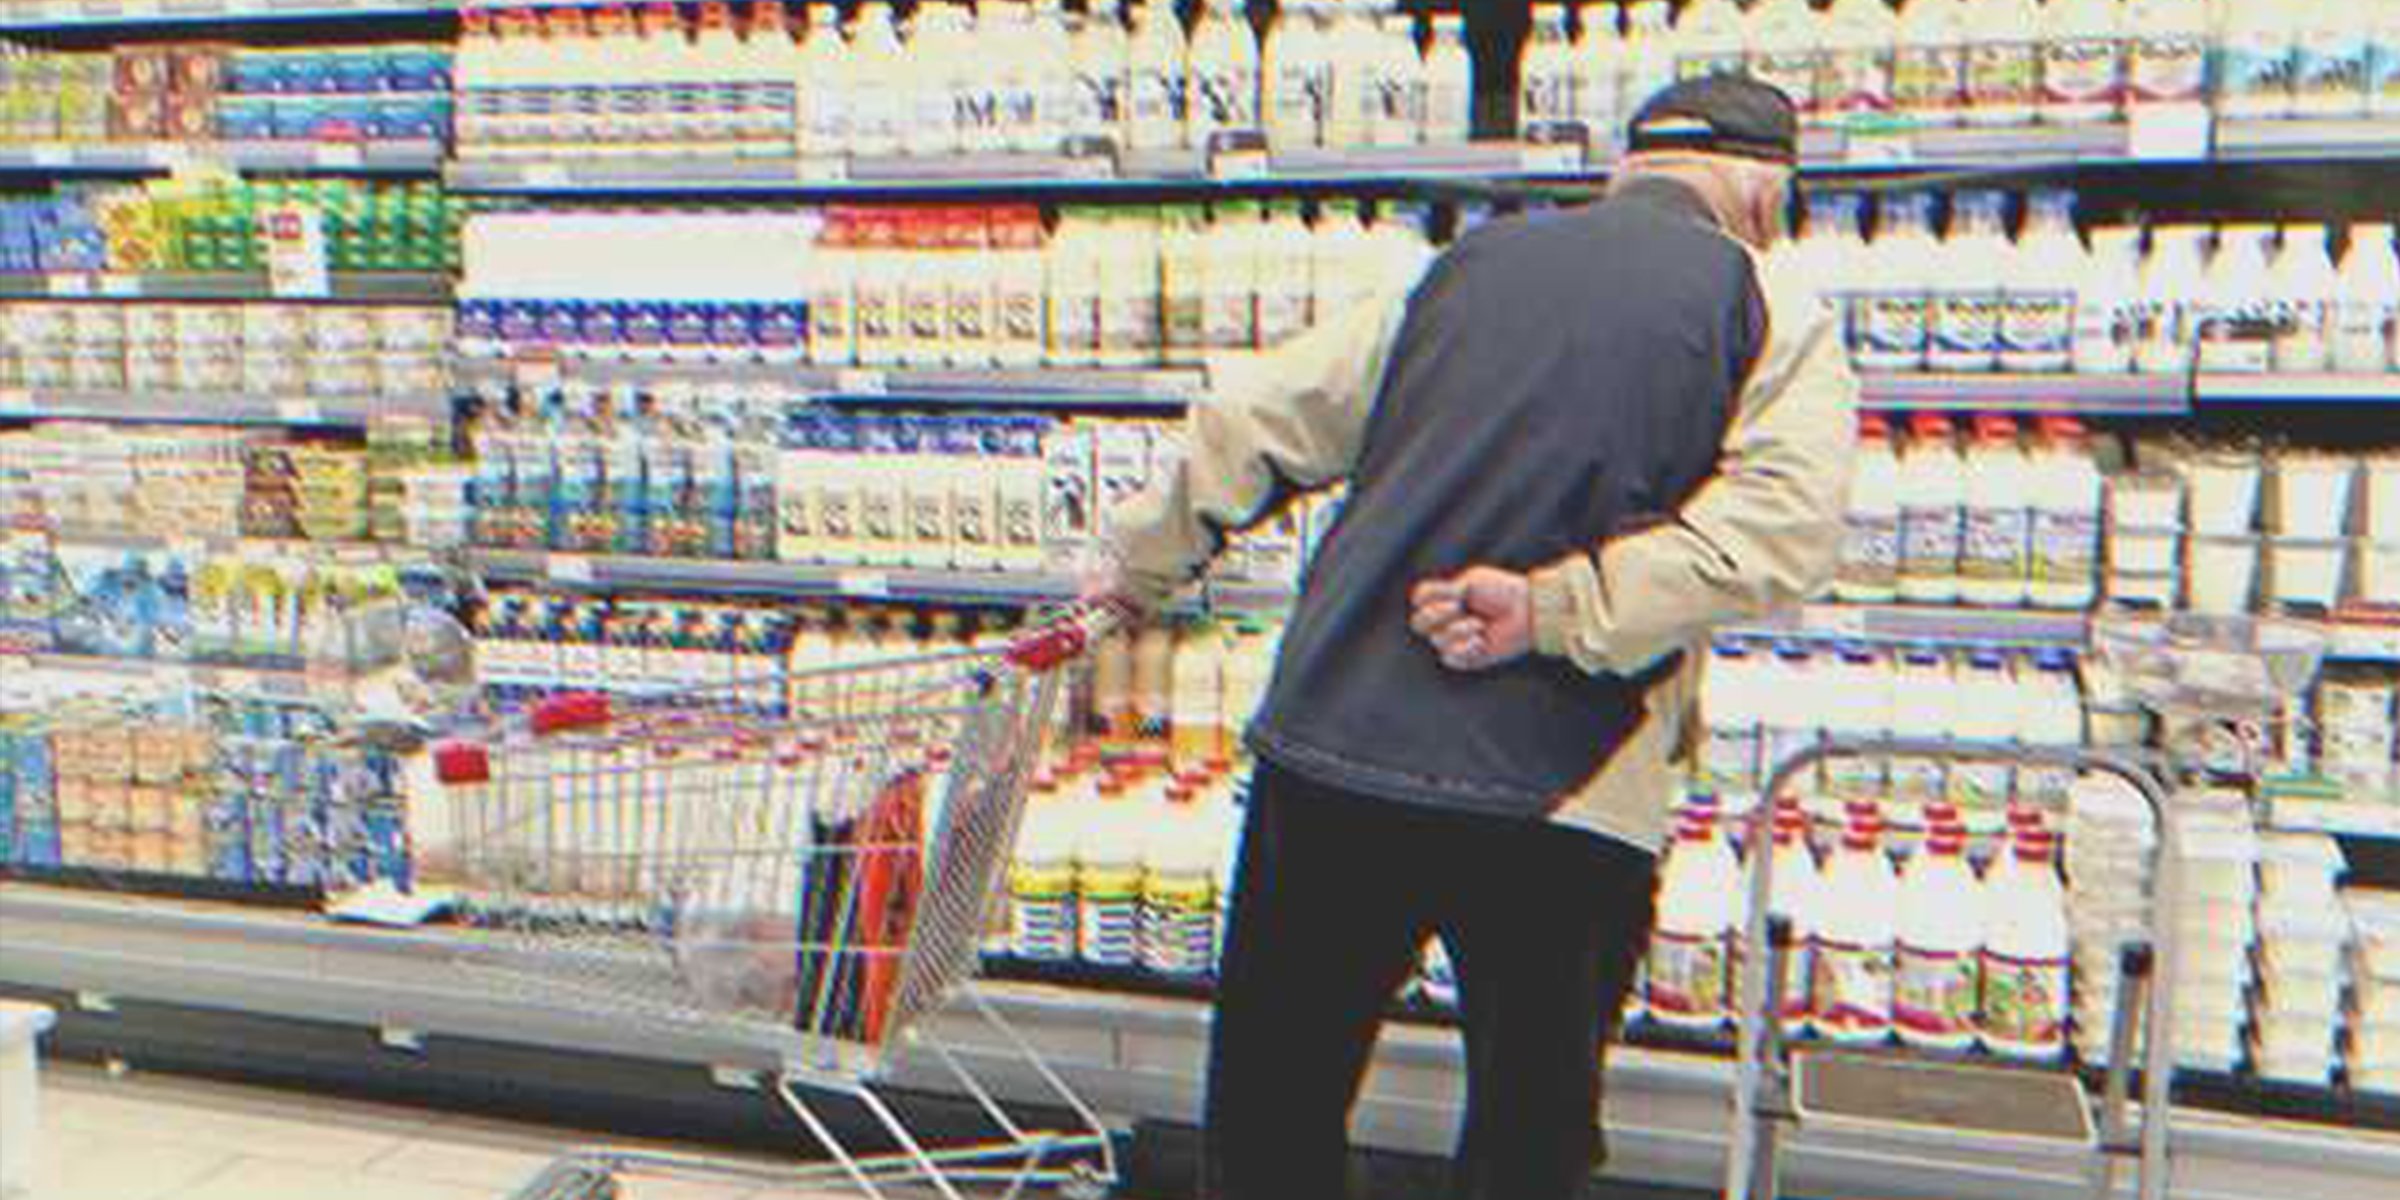 Old man in a grocery store | Source: Shutterstock